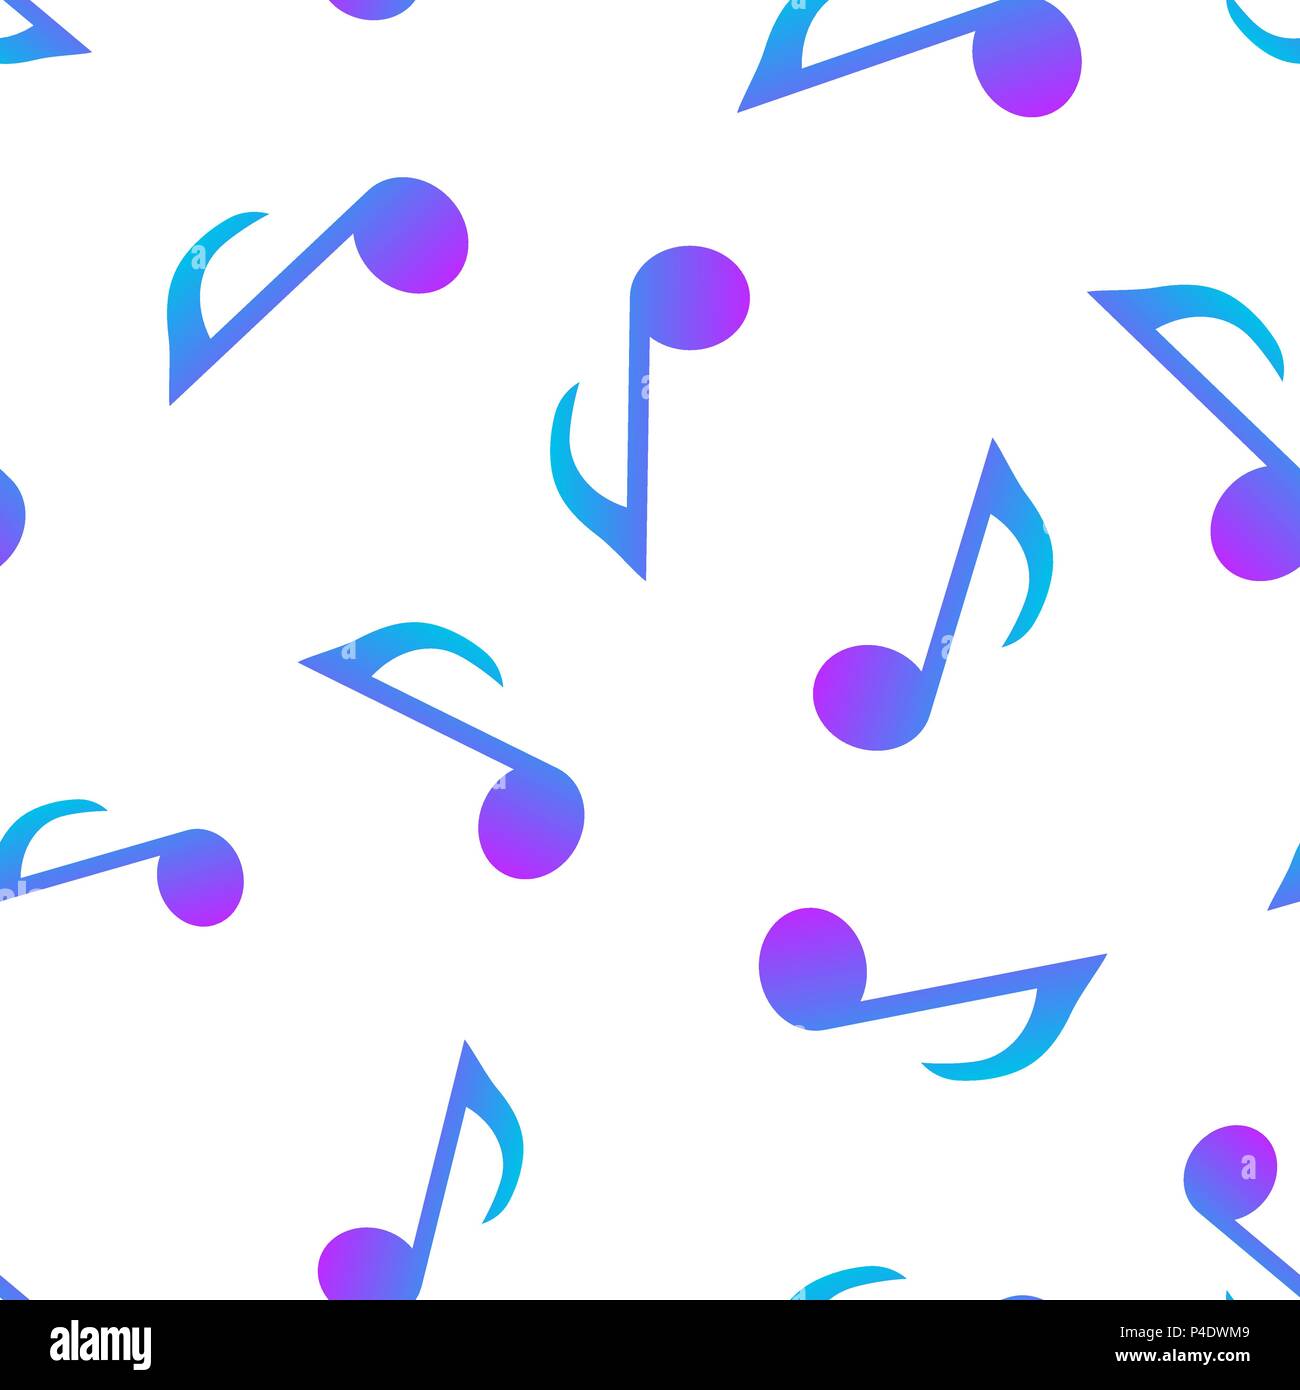 Music Note Wallpaper Vector Images (over 4,800)